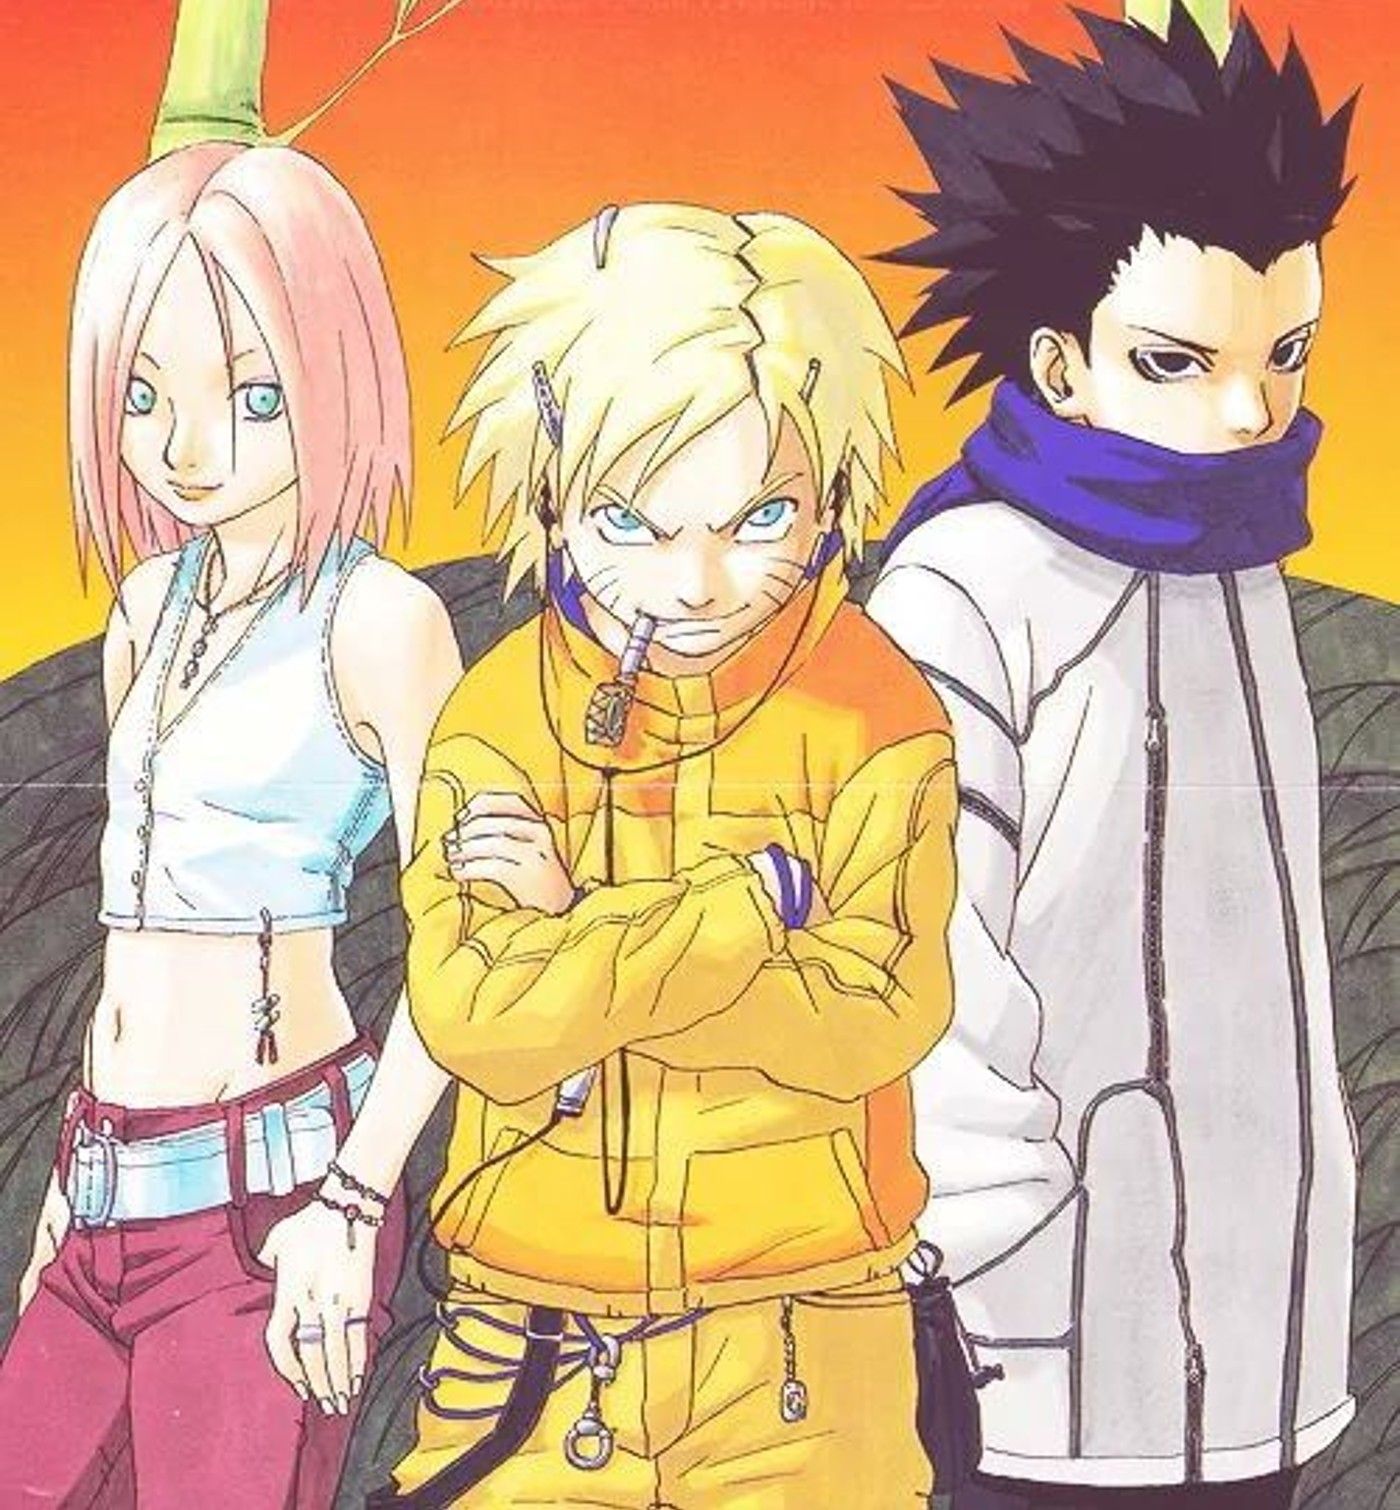 Naruto's team 7 sports an early 2000s look in strange concept art.